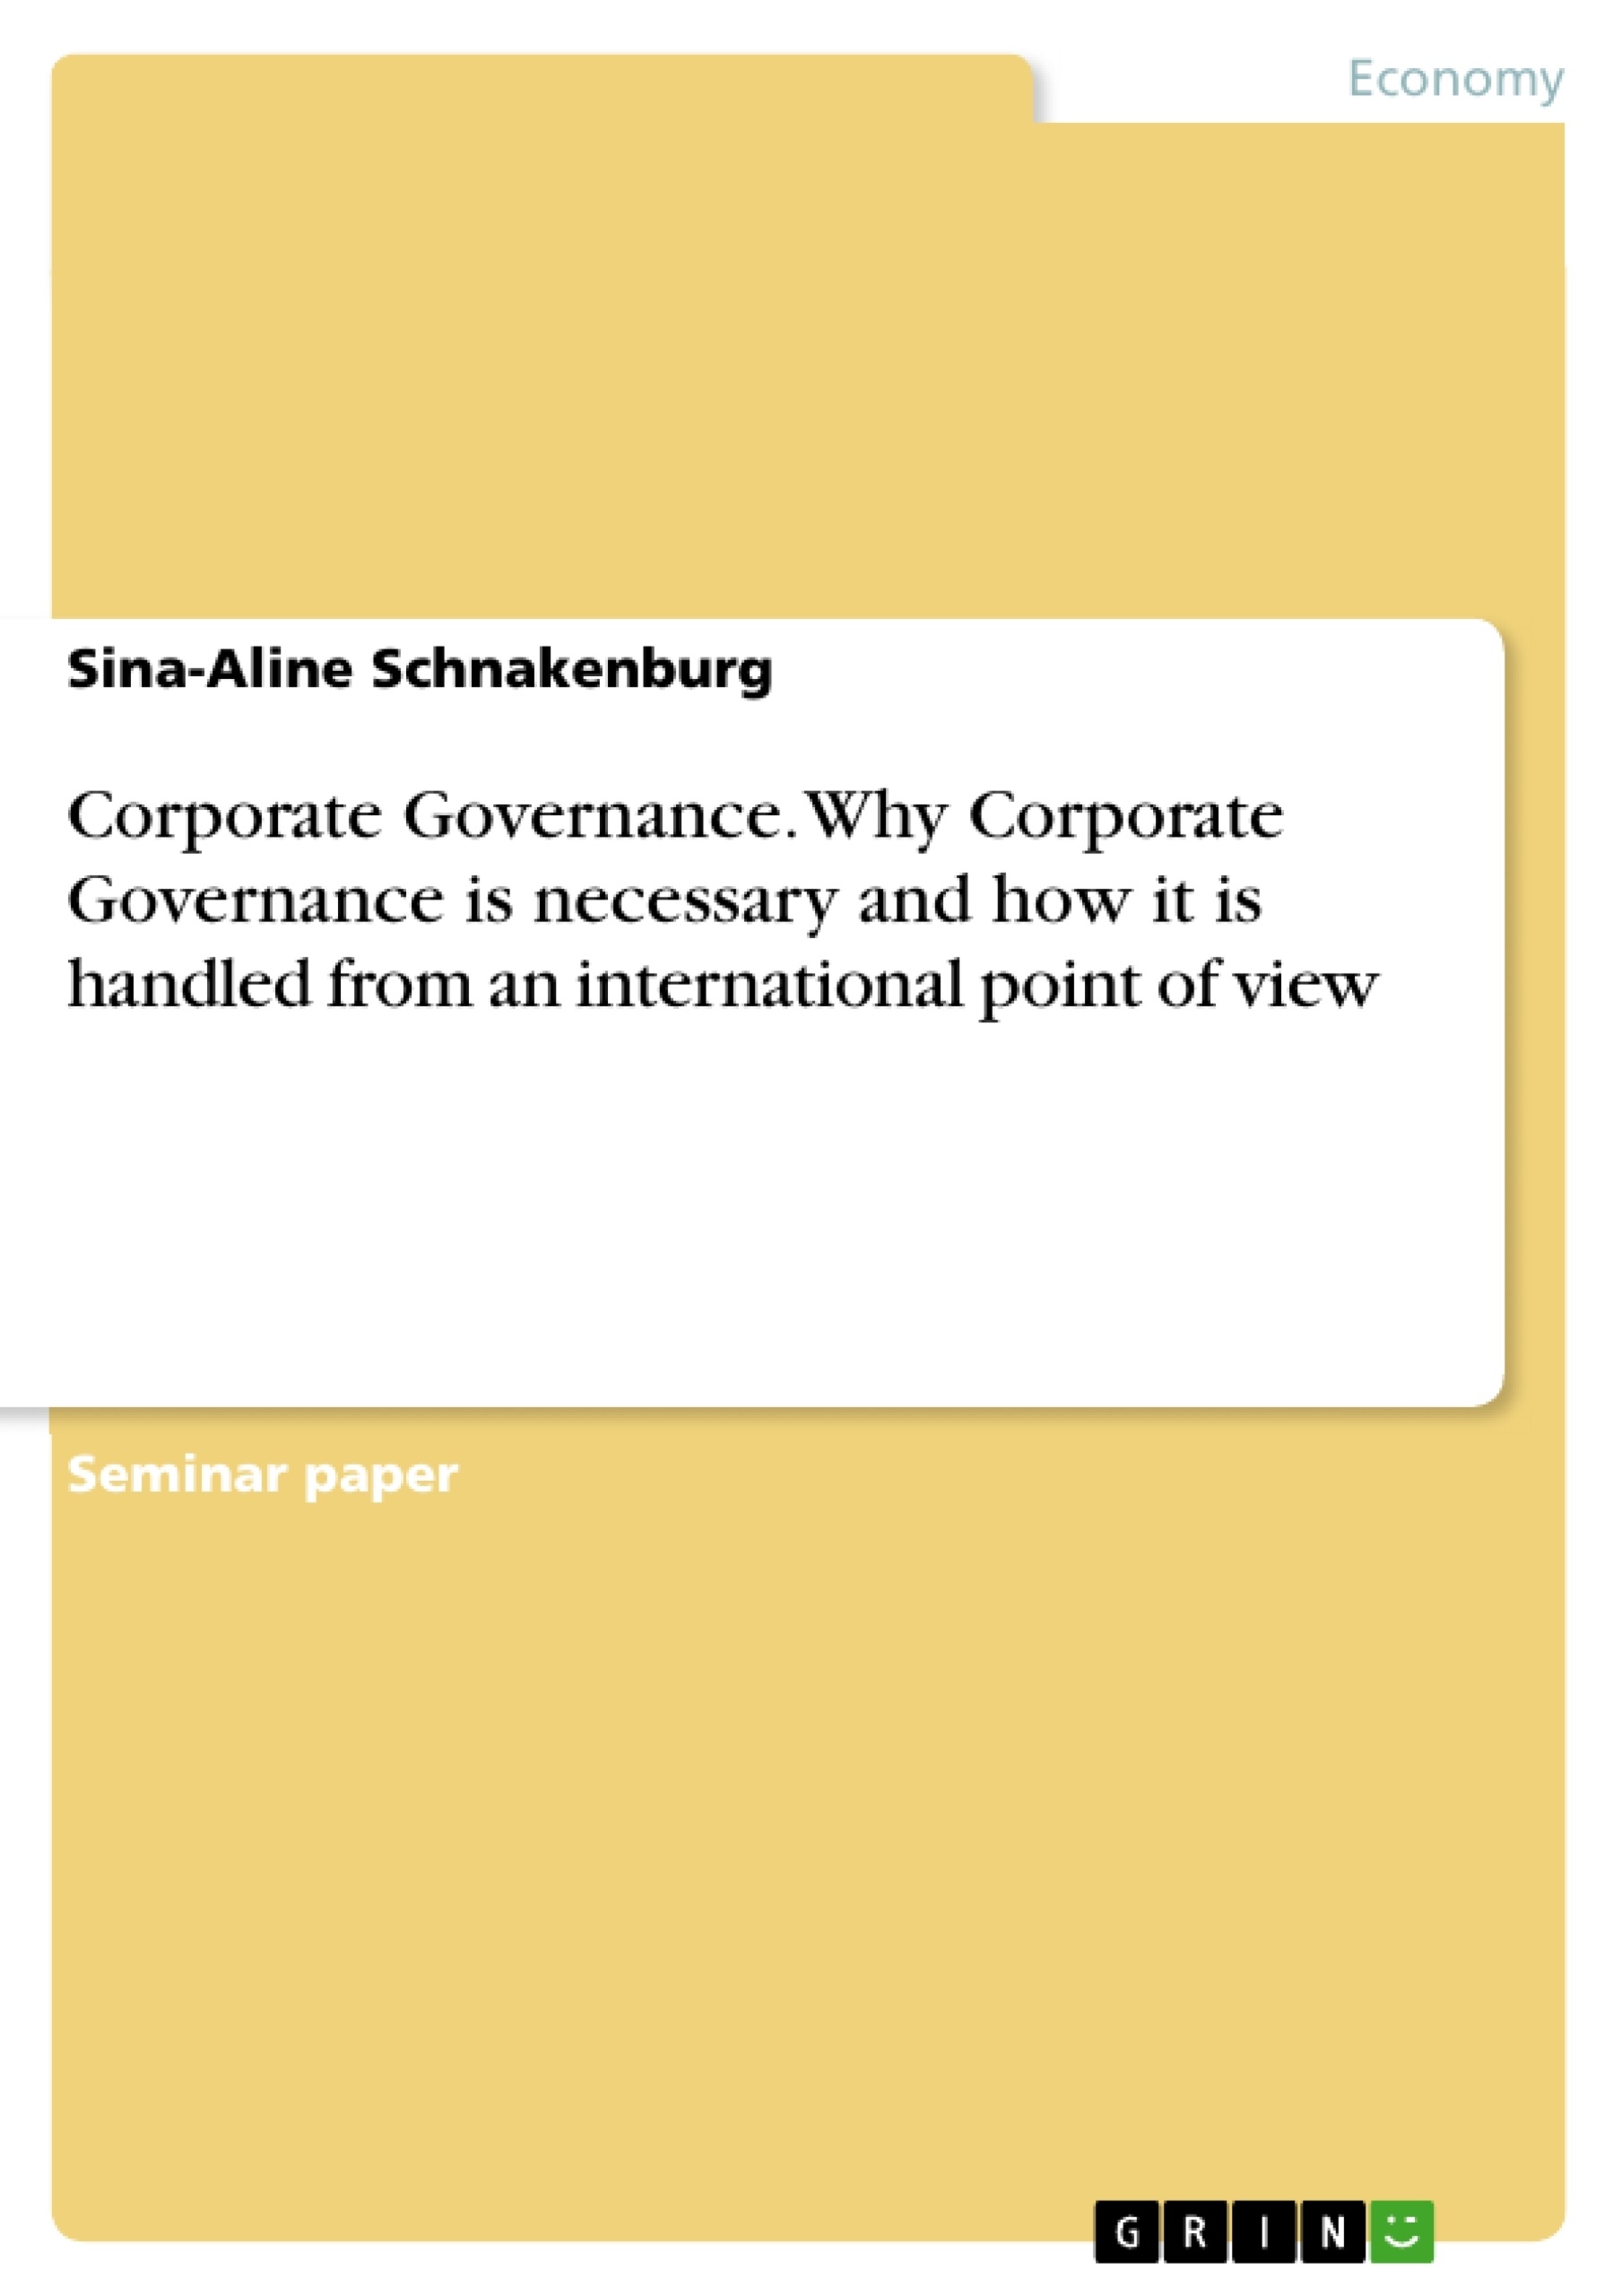 Title: Corporate Governance. Why Corporate Governance is necessary and how it is handled from an international point of view